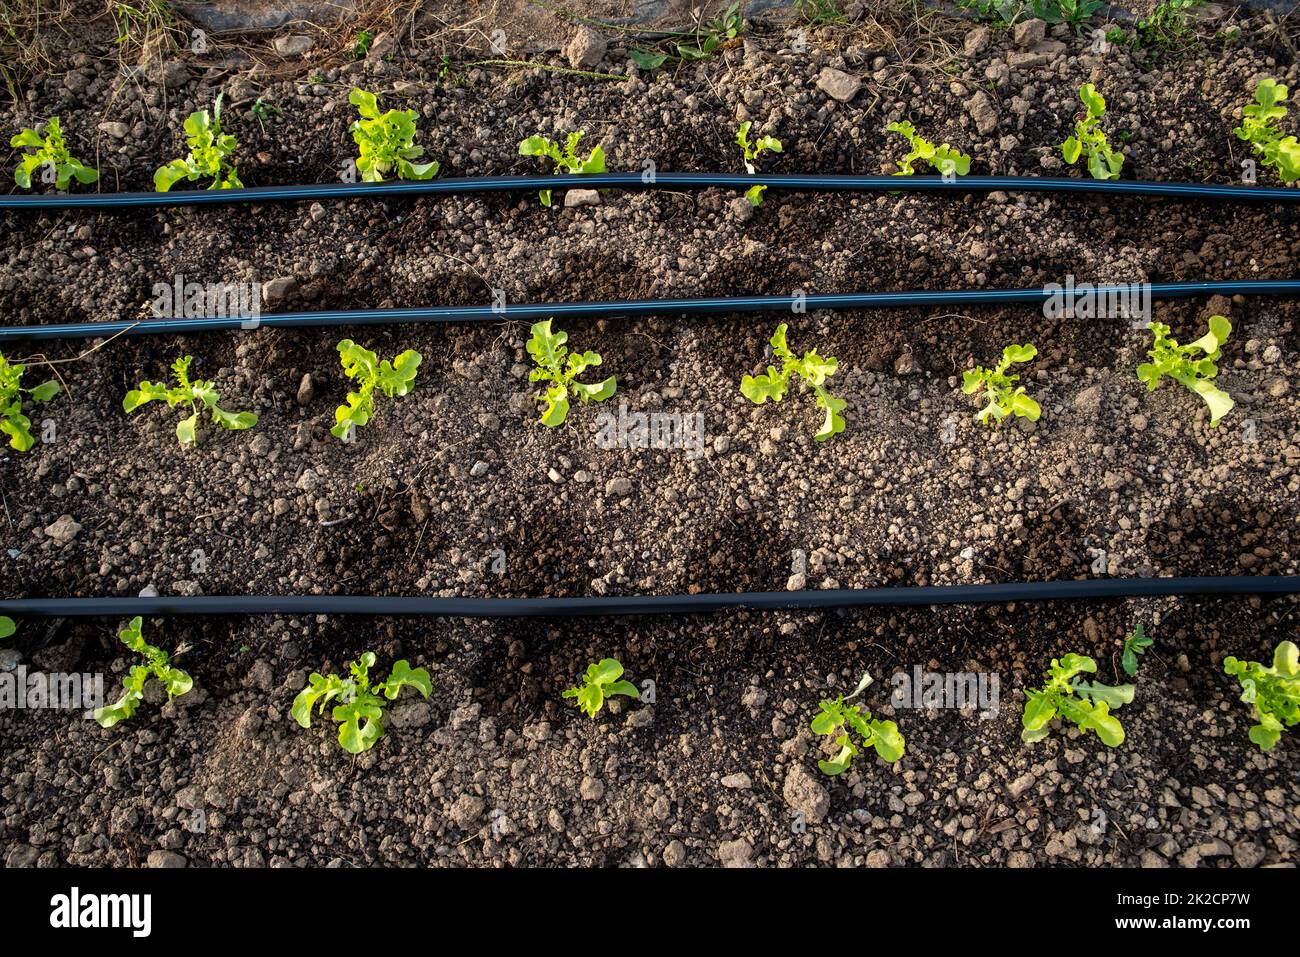 Arugula seedling plants grow in wet soil by irrigation lines Stock Photo